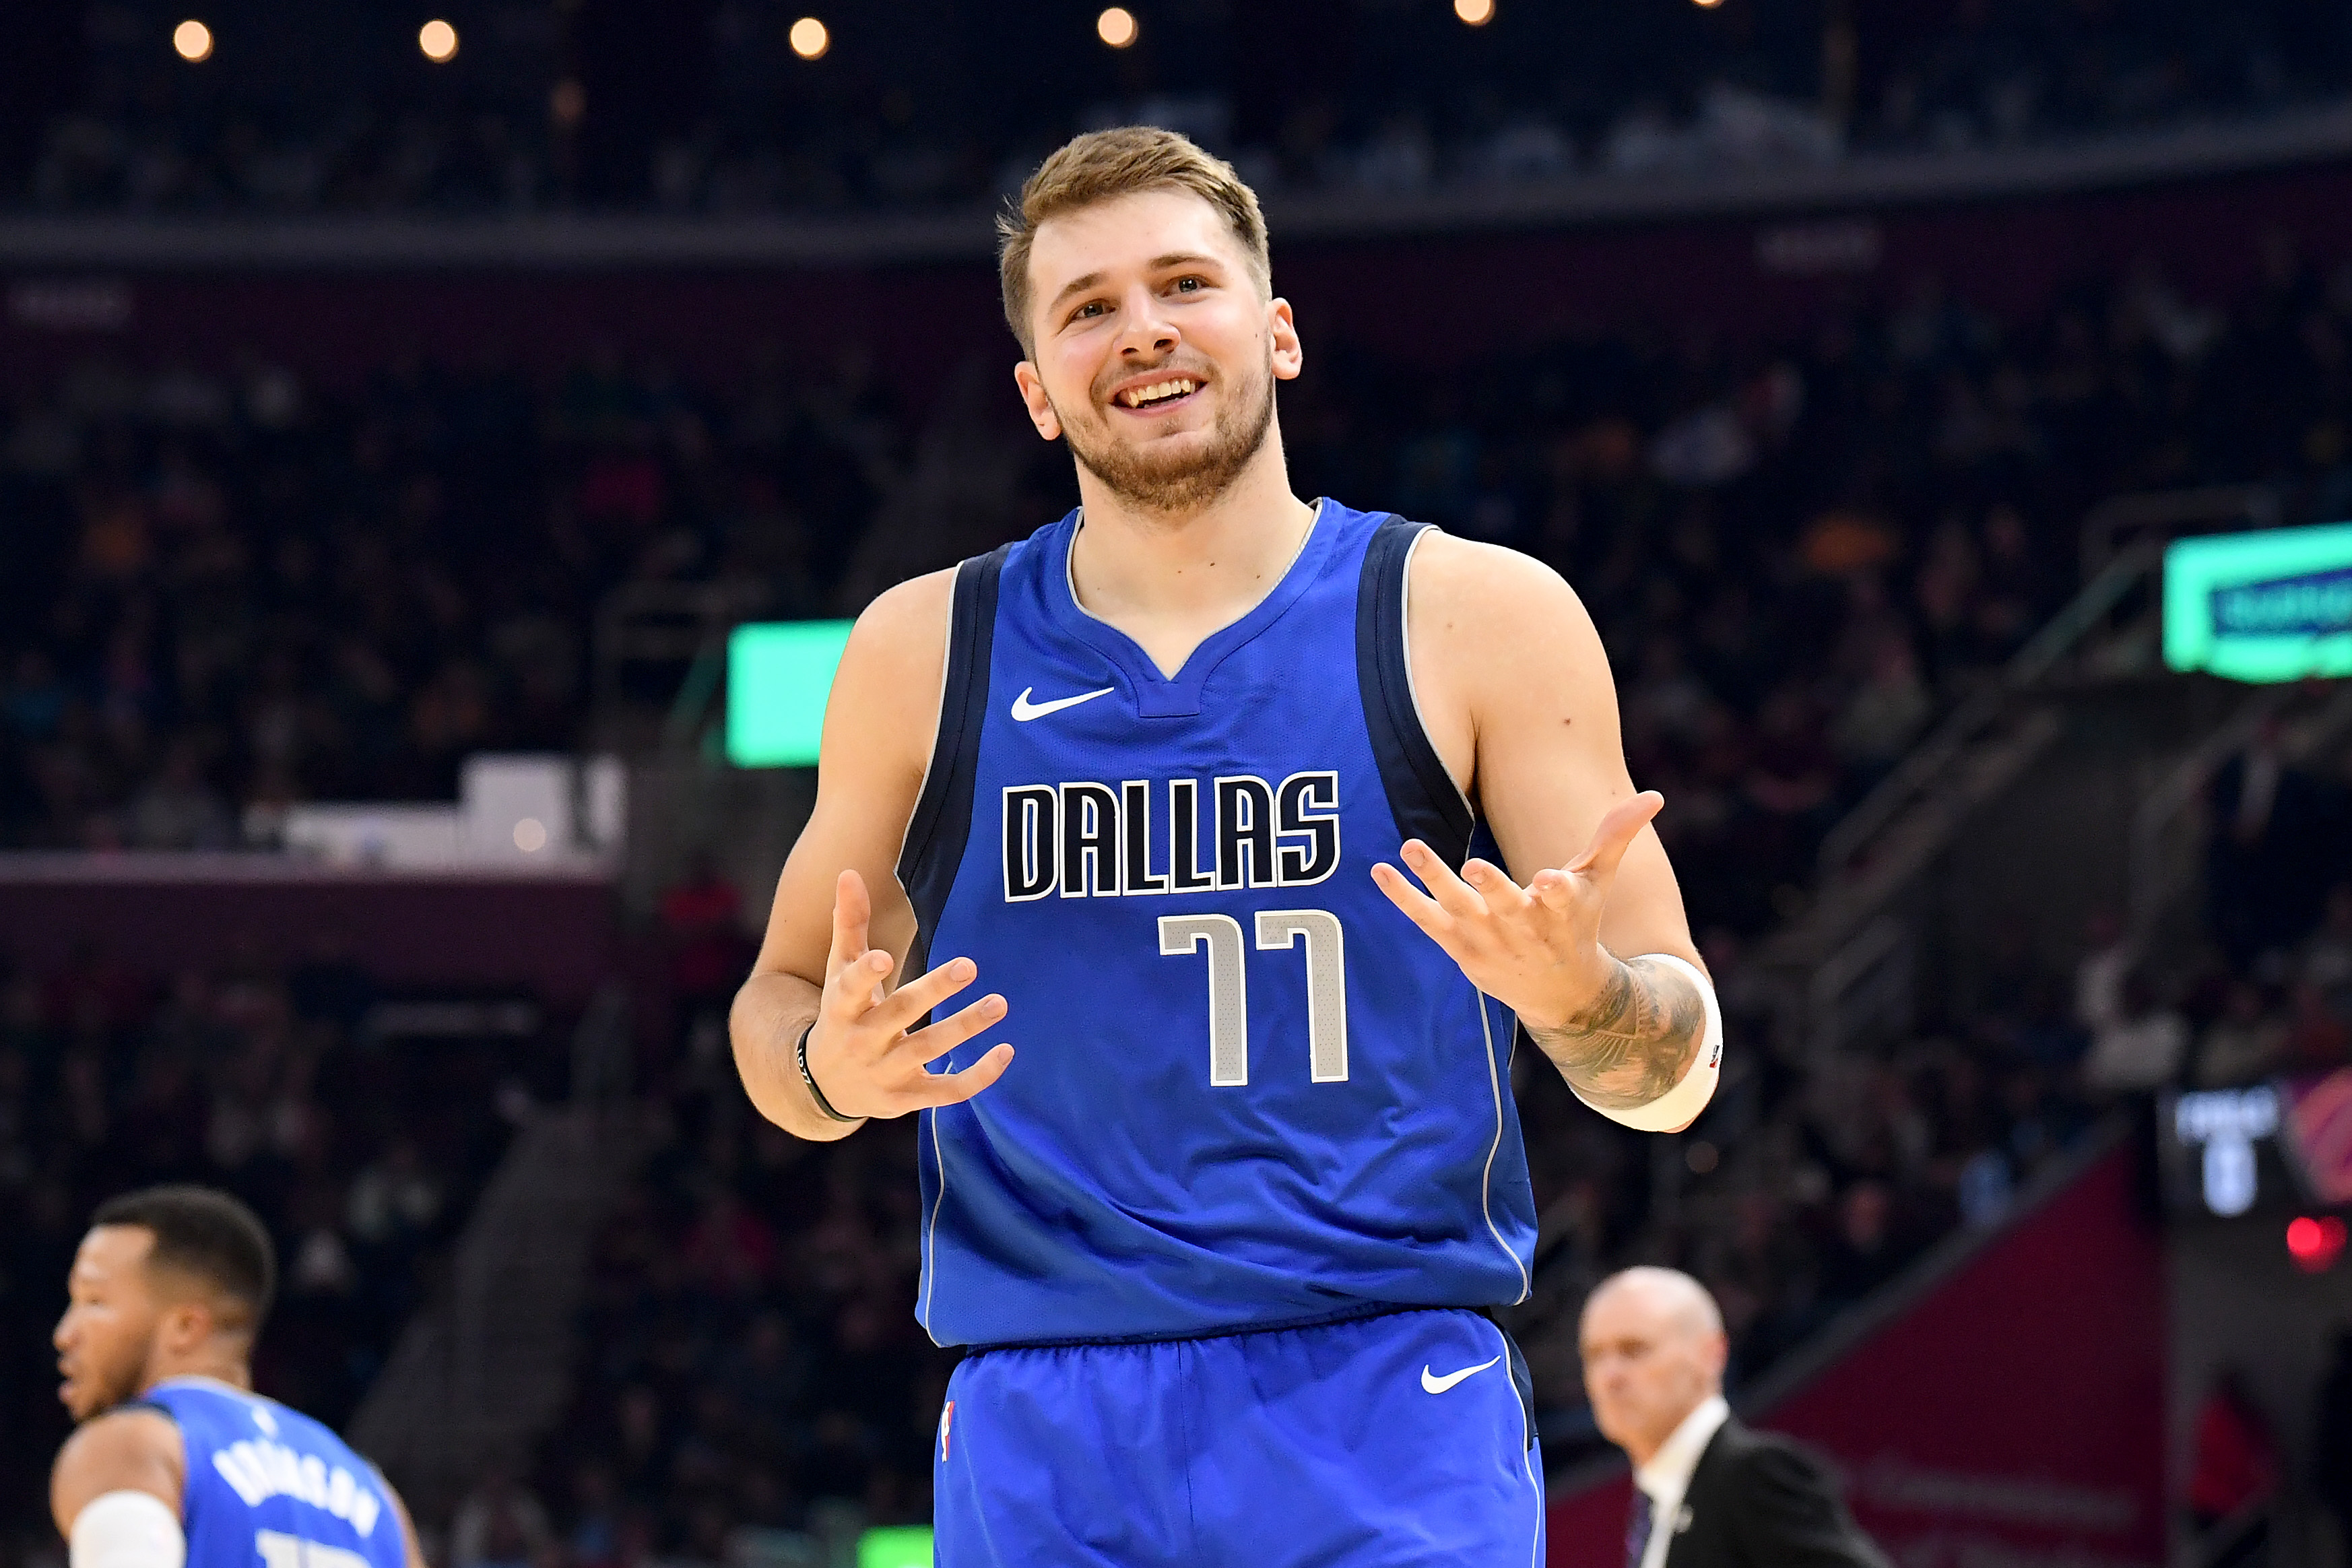 Luka Doncic reacts after hitting a three during the first half against the Cleveland Cavaliers at Rocket Mortgage Fieldhouse on November 3, 2019, in Cleveland, Ohio. | Source: Getty Images